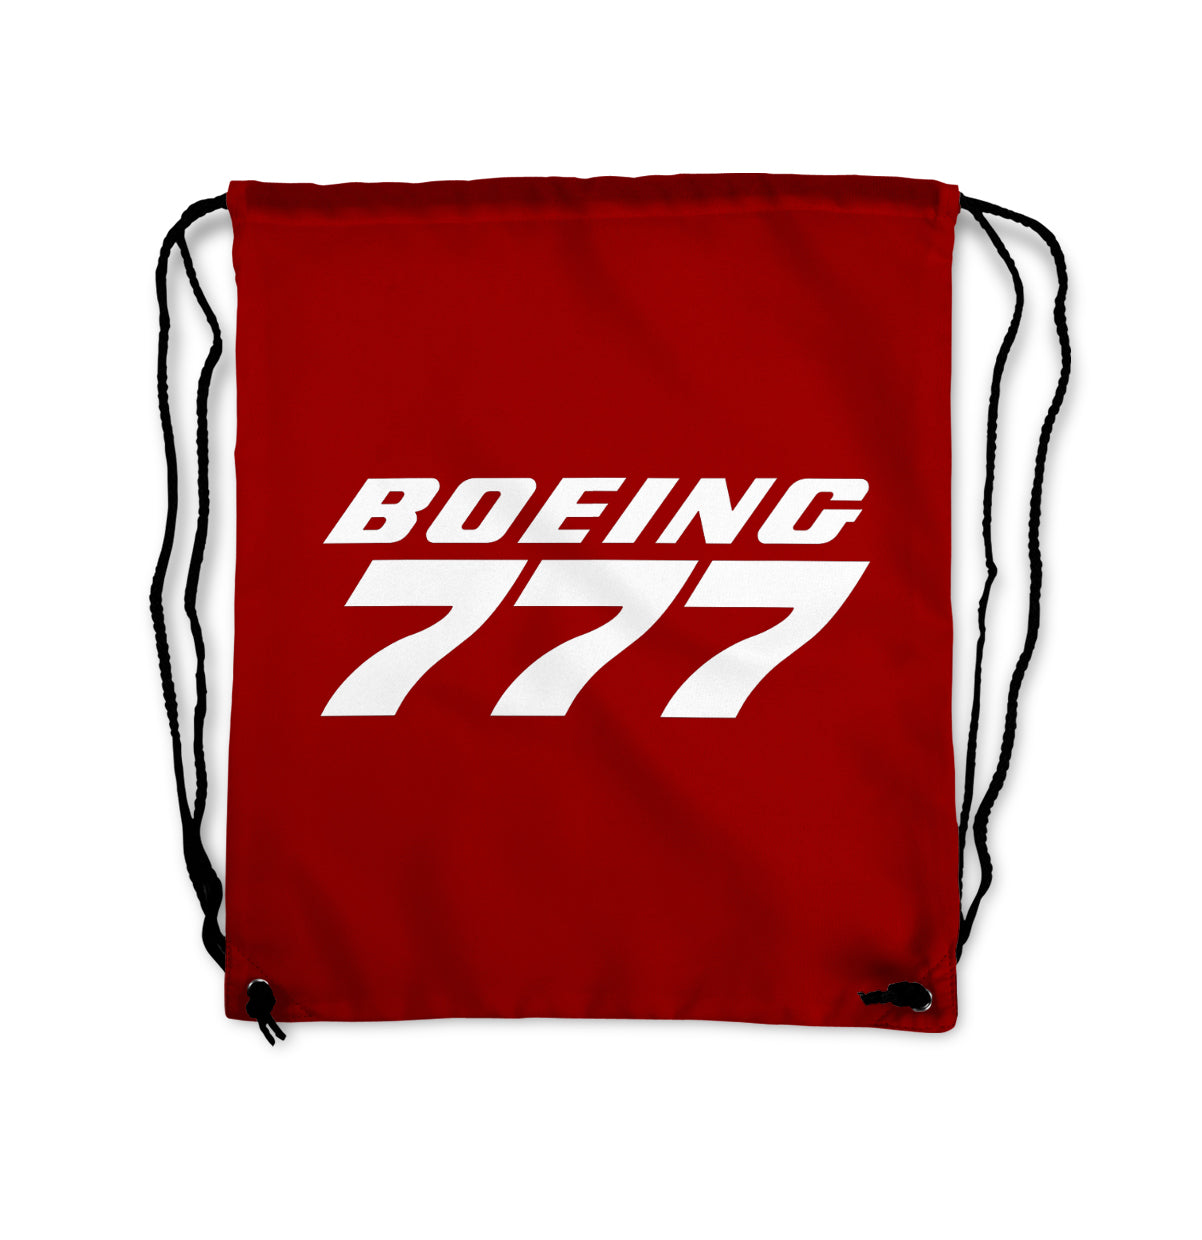 Boeing 777 & Text Designed Drawstring Bags